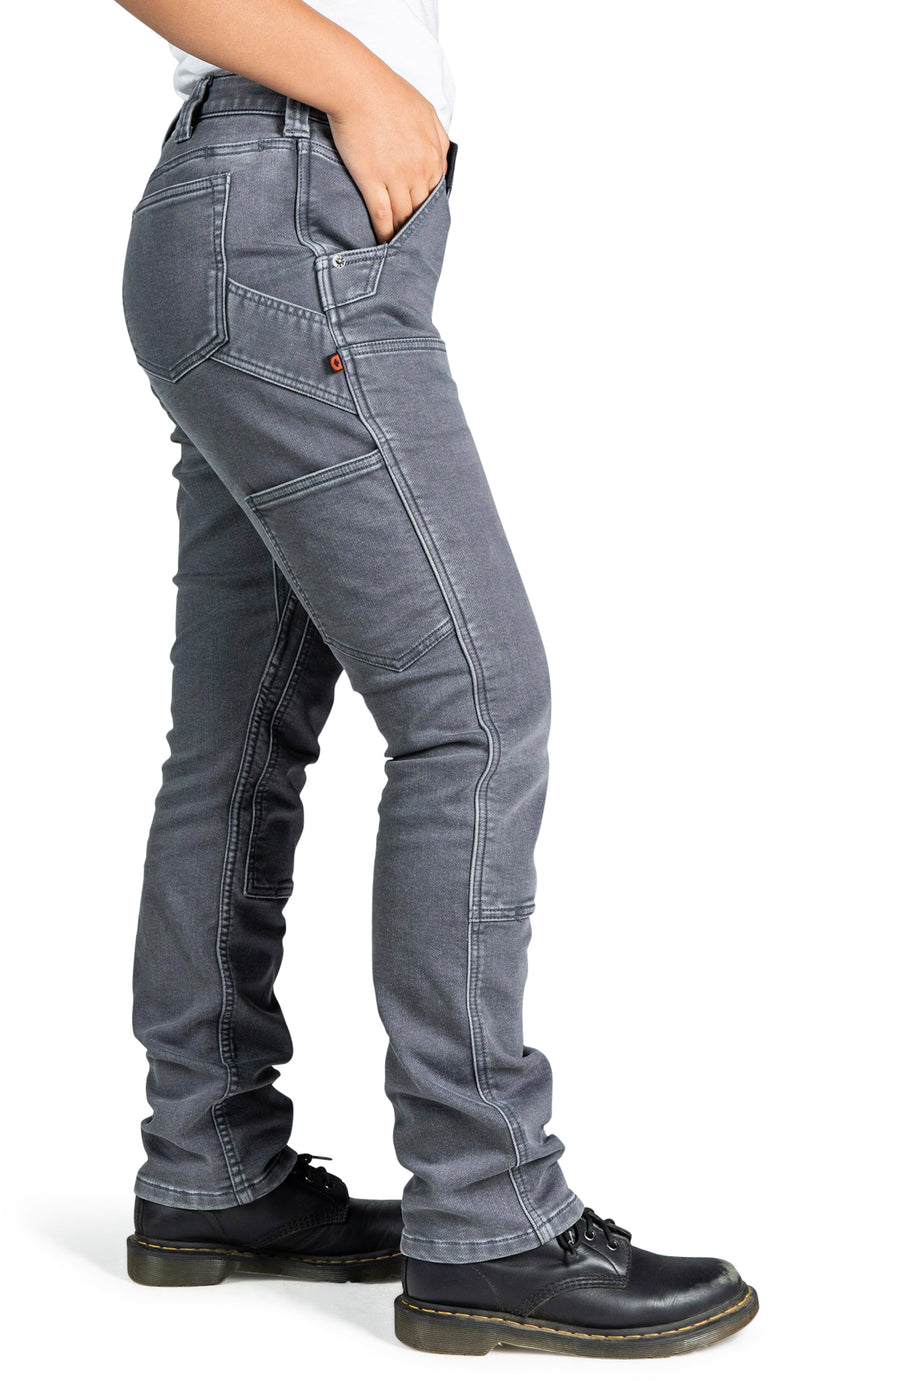 Freshley Overalls For Women in Grey Thermal Denim